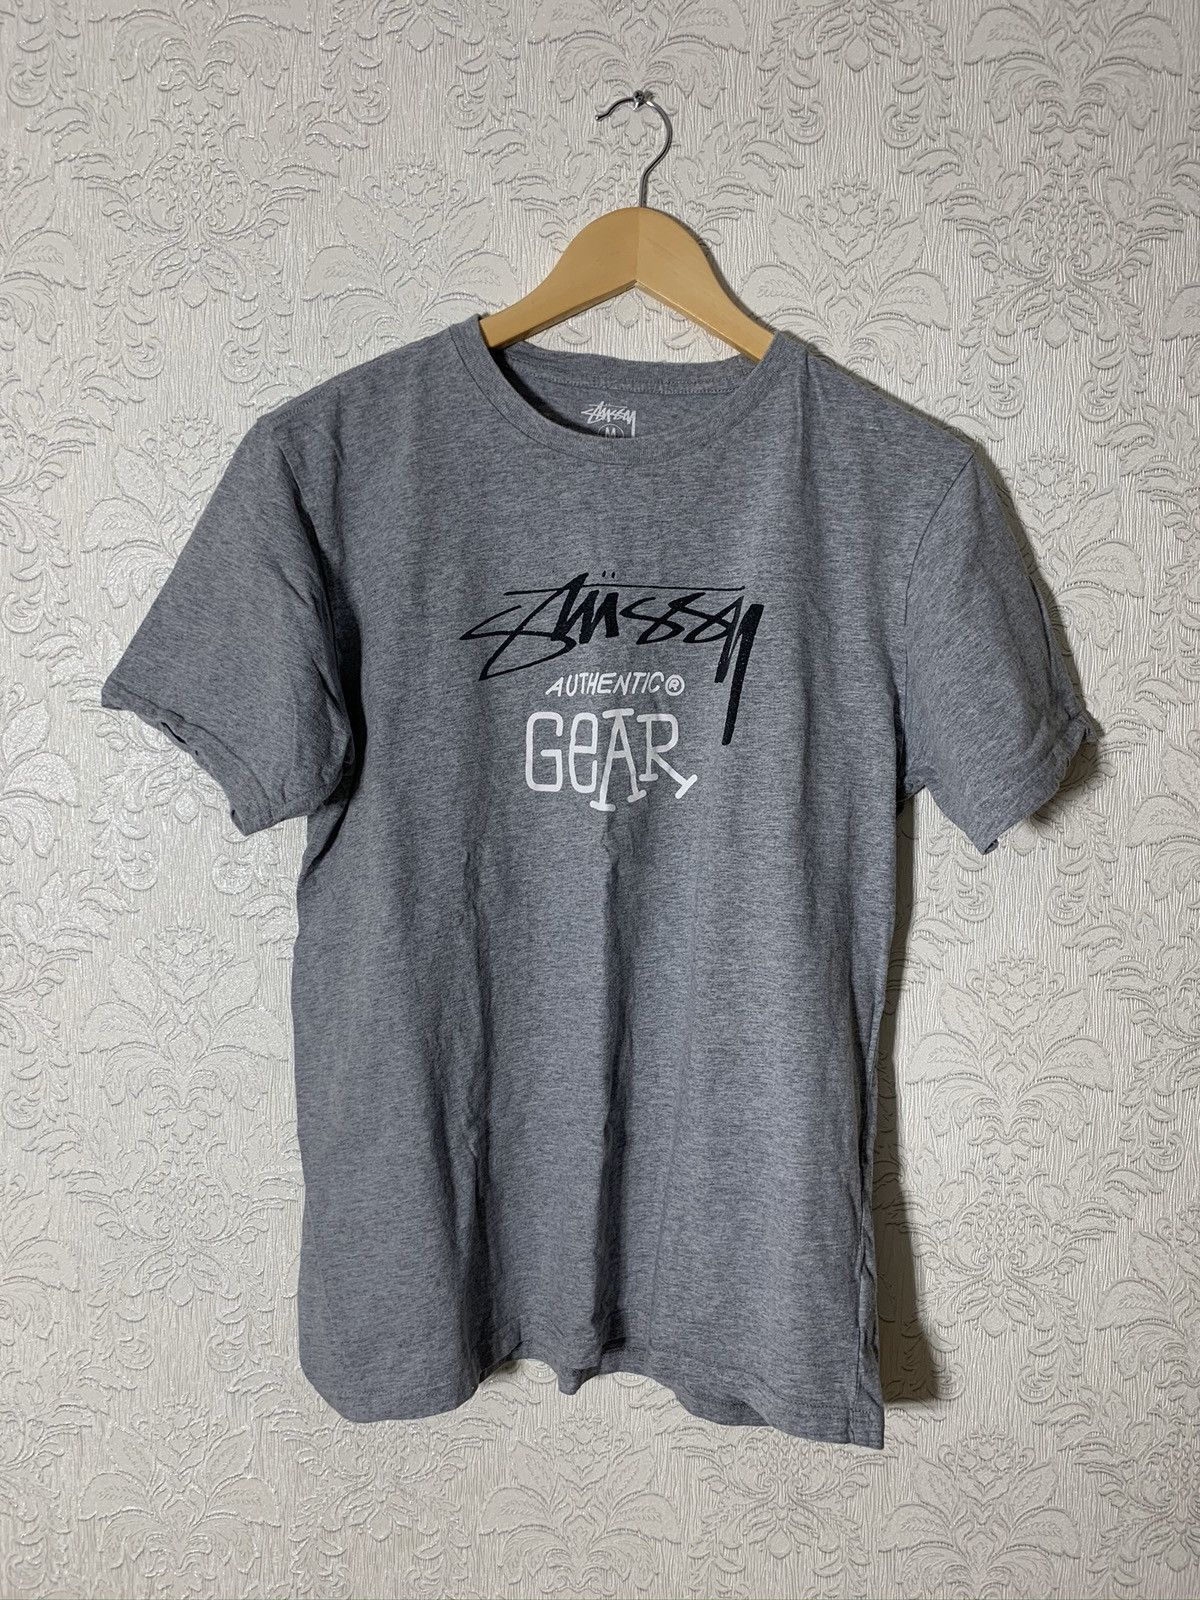 Stussy Stussy gear authentic t shirt M | Grailed